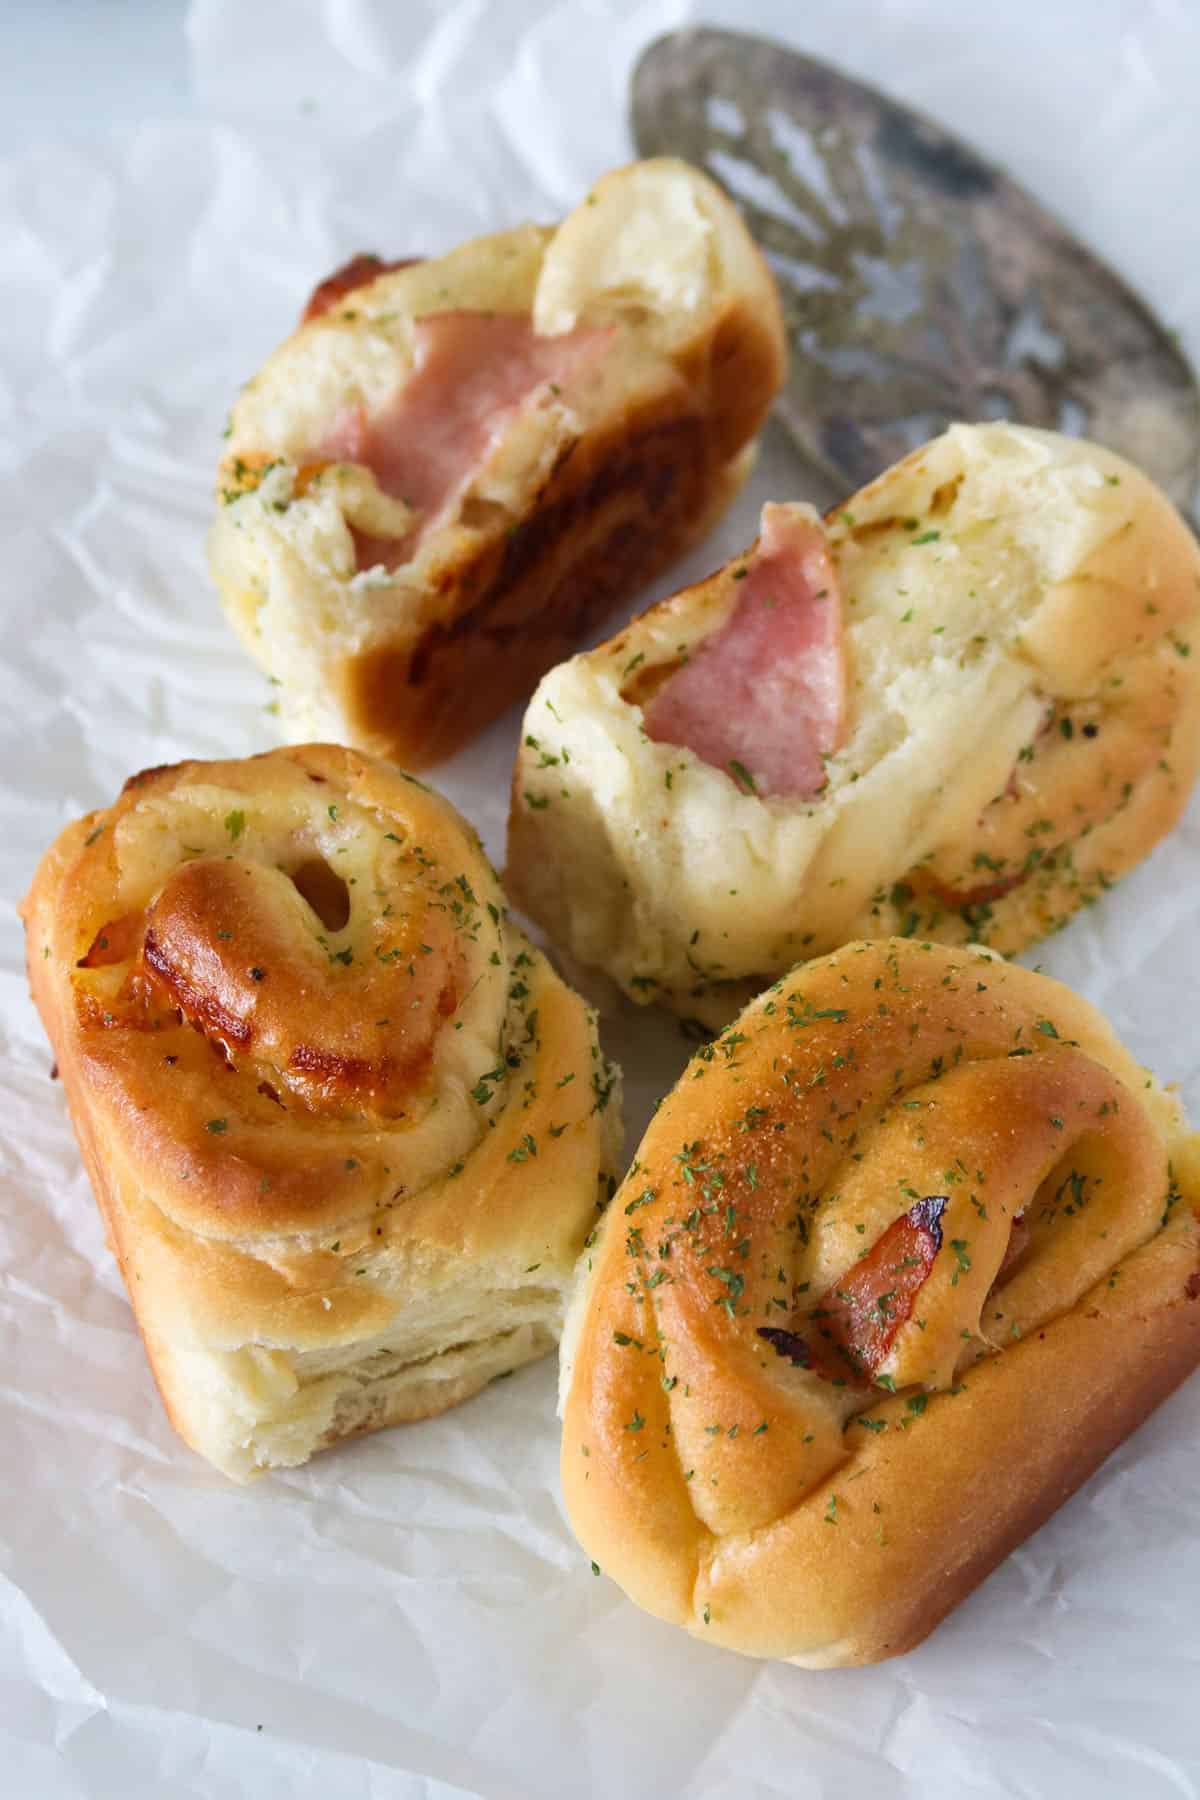 Pieces of ham and cheese rolls on a white paper.